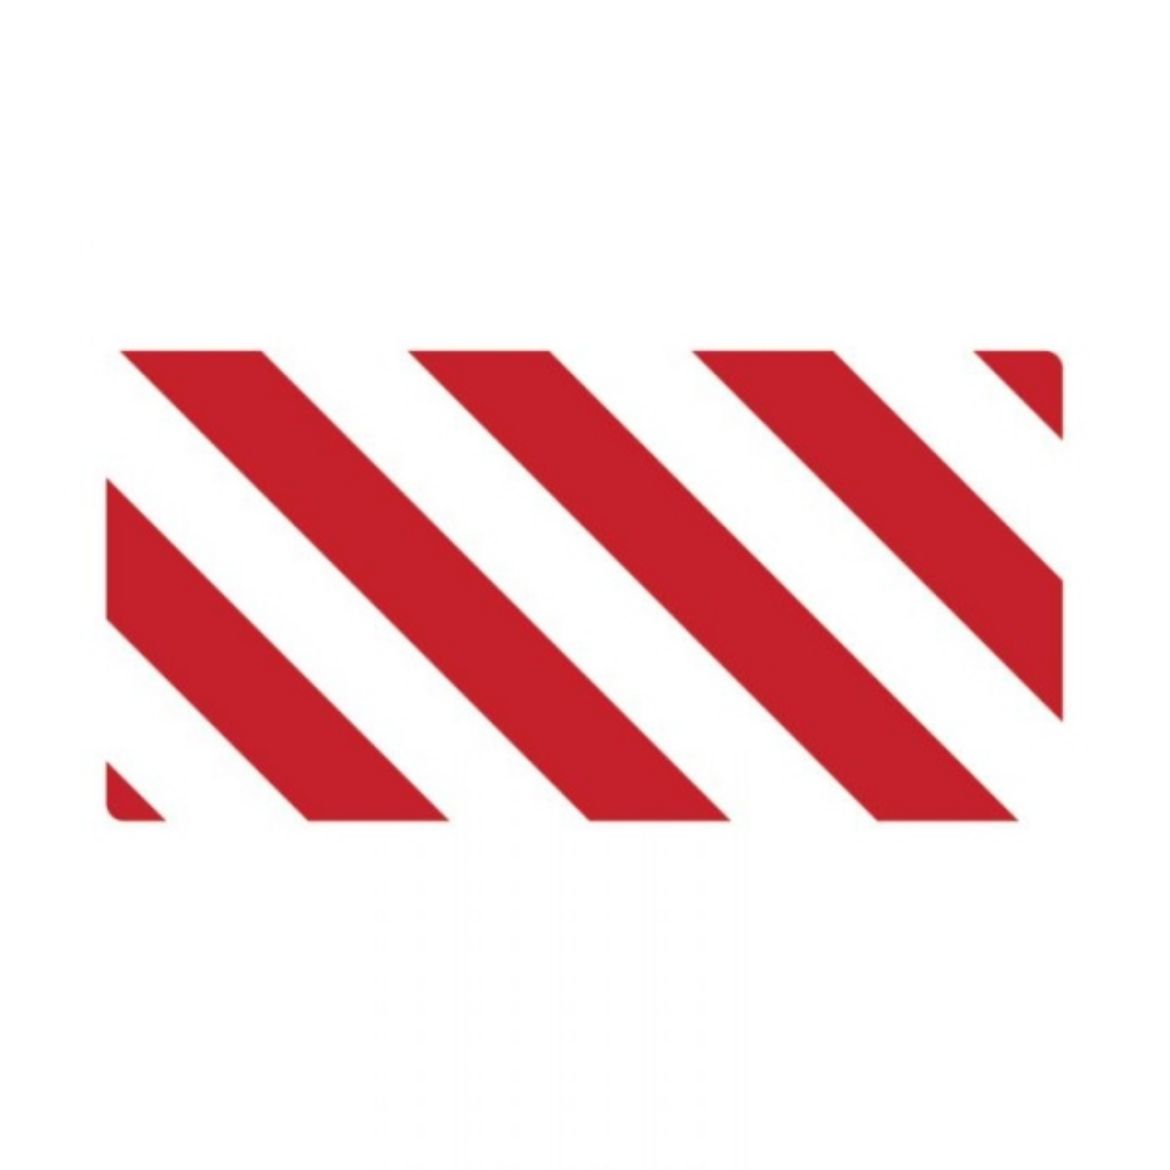 Picture of FIRE SIGN RED/WHITE STRIPE 1200MM (H) X 750MM (W)  METAL